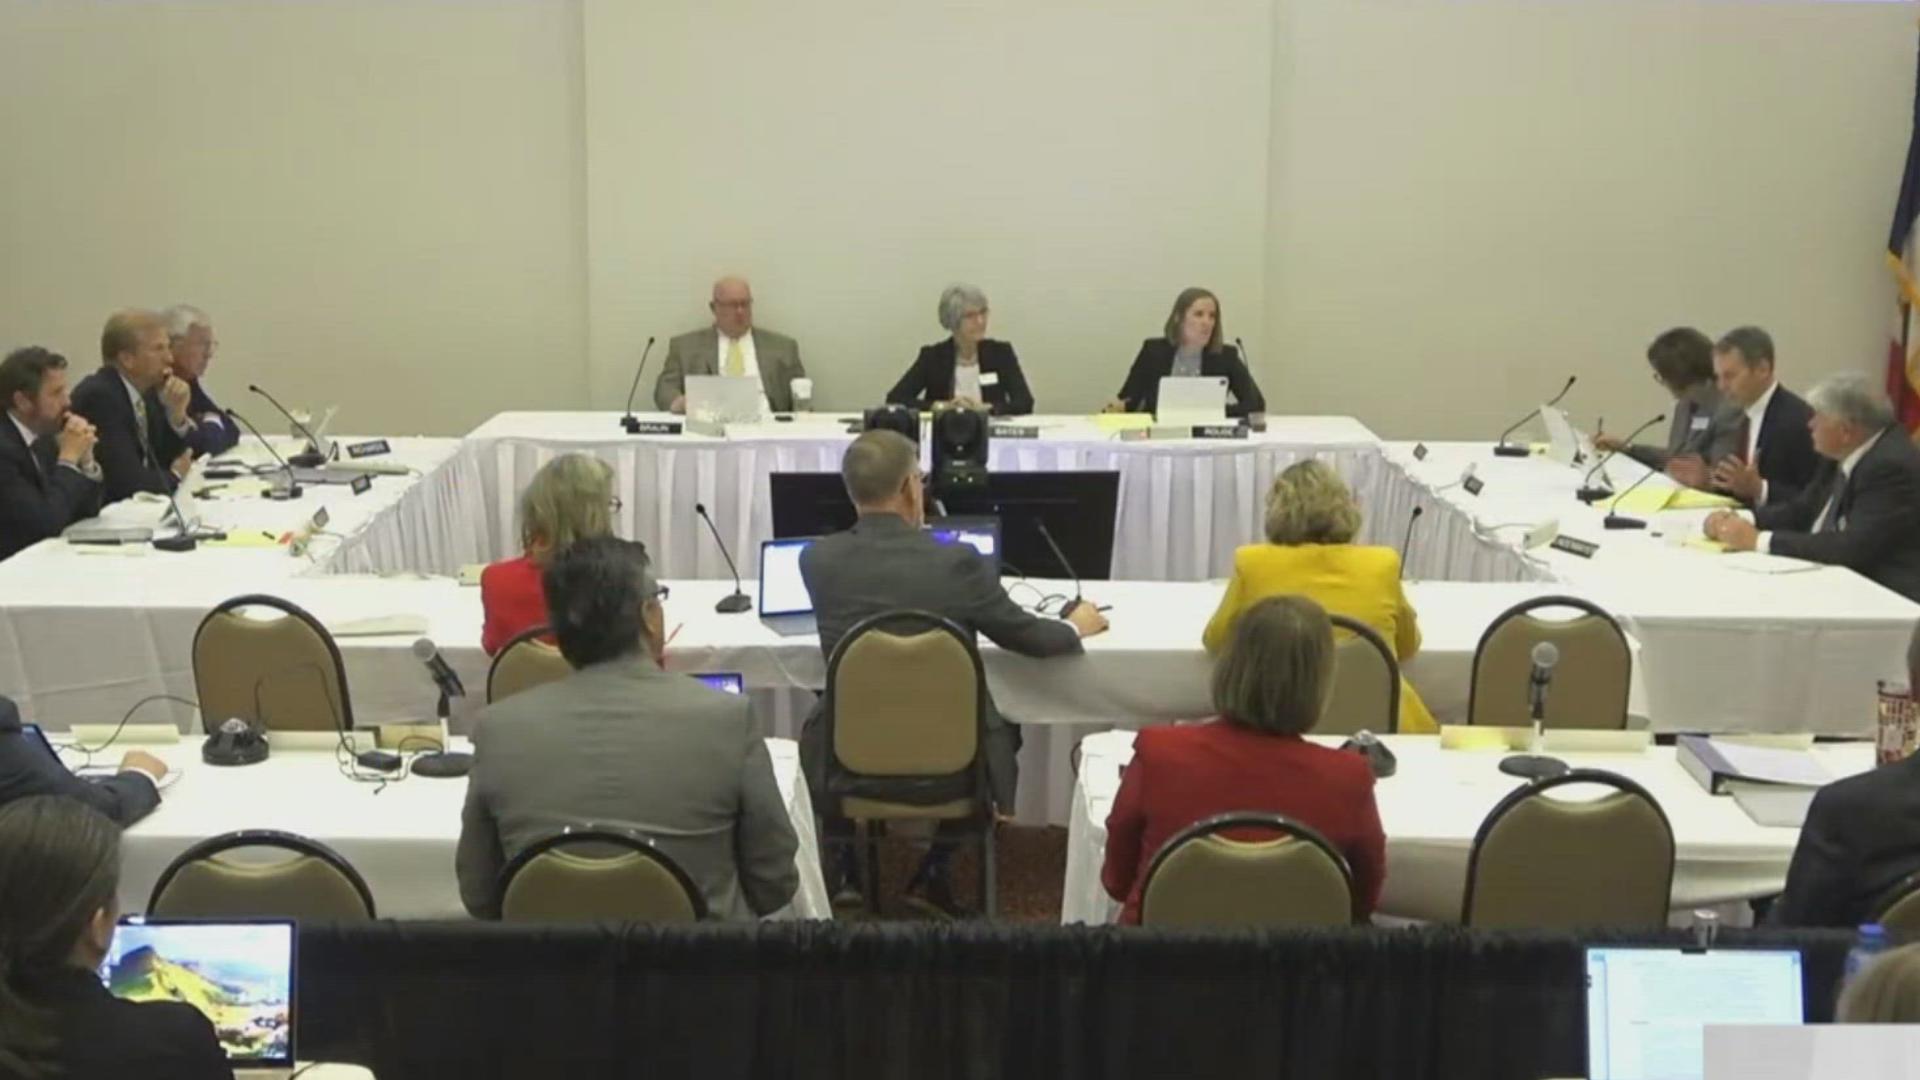 Three Iowa universities introduced their plans to terminate their current diversity equity and inclusion programs to the Board of Regents on Thursday.